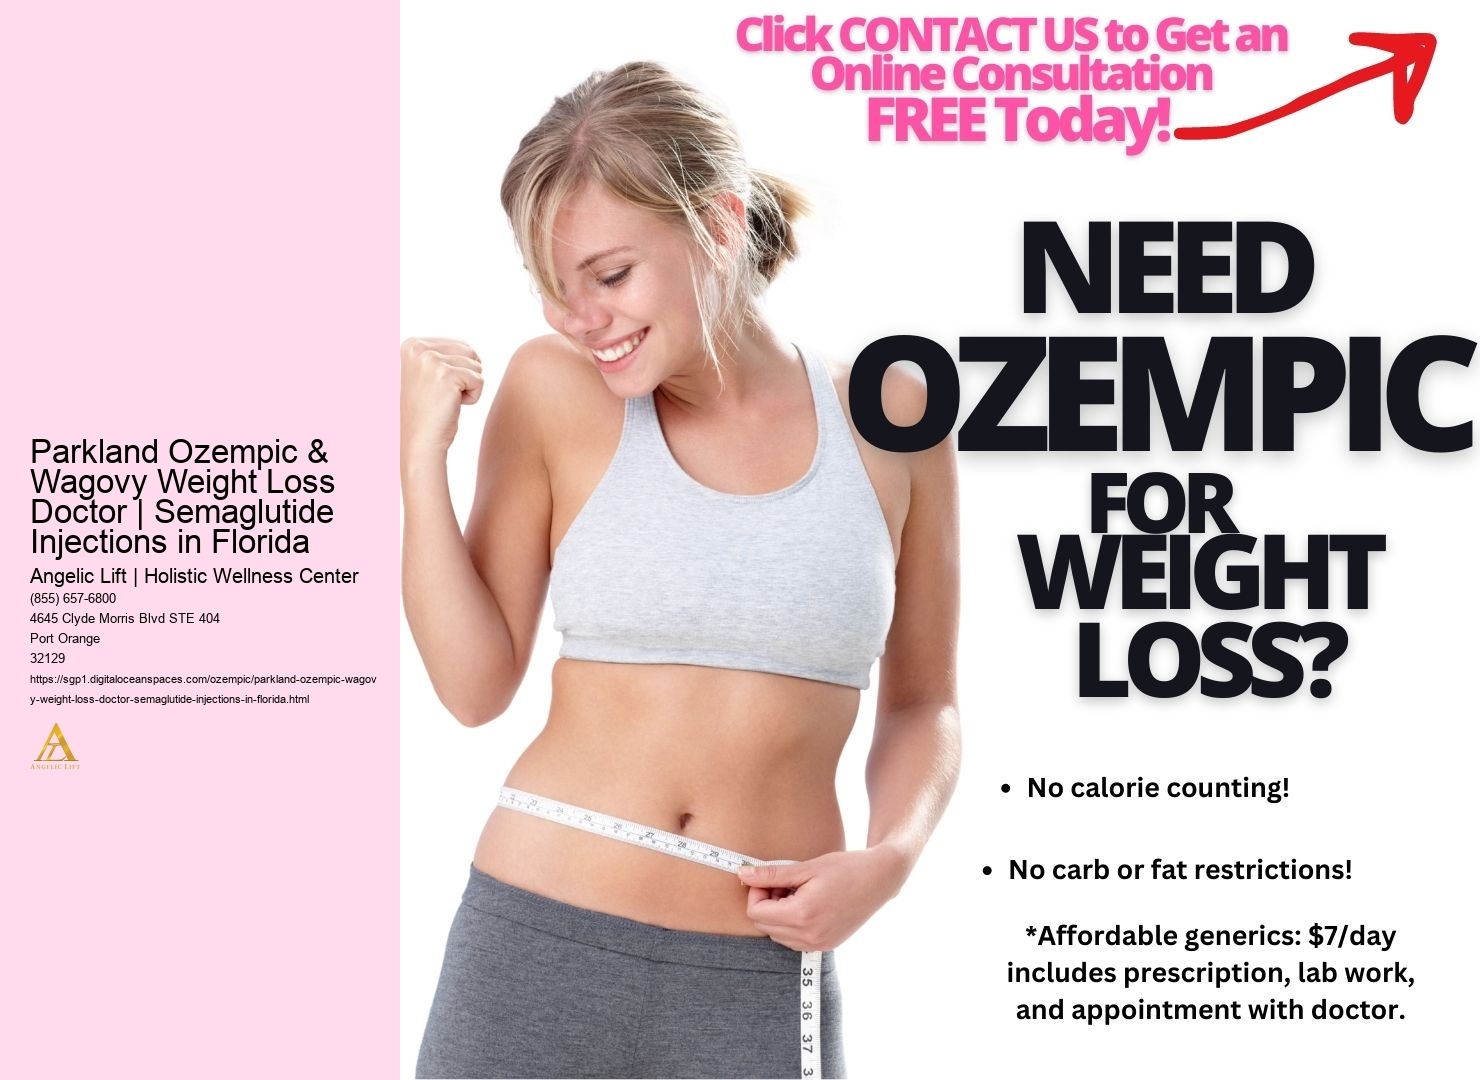 Parkland Ozempic & Wagovy Weight Loss Doctor | Semaglutide Injections in Florida